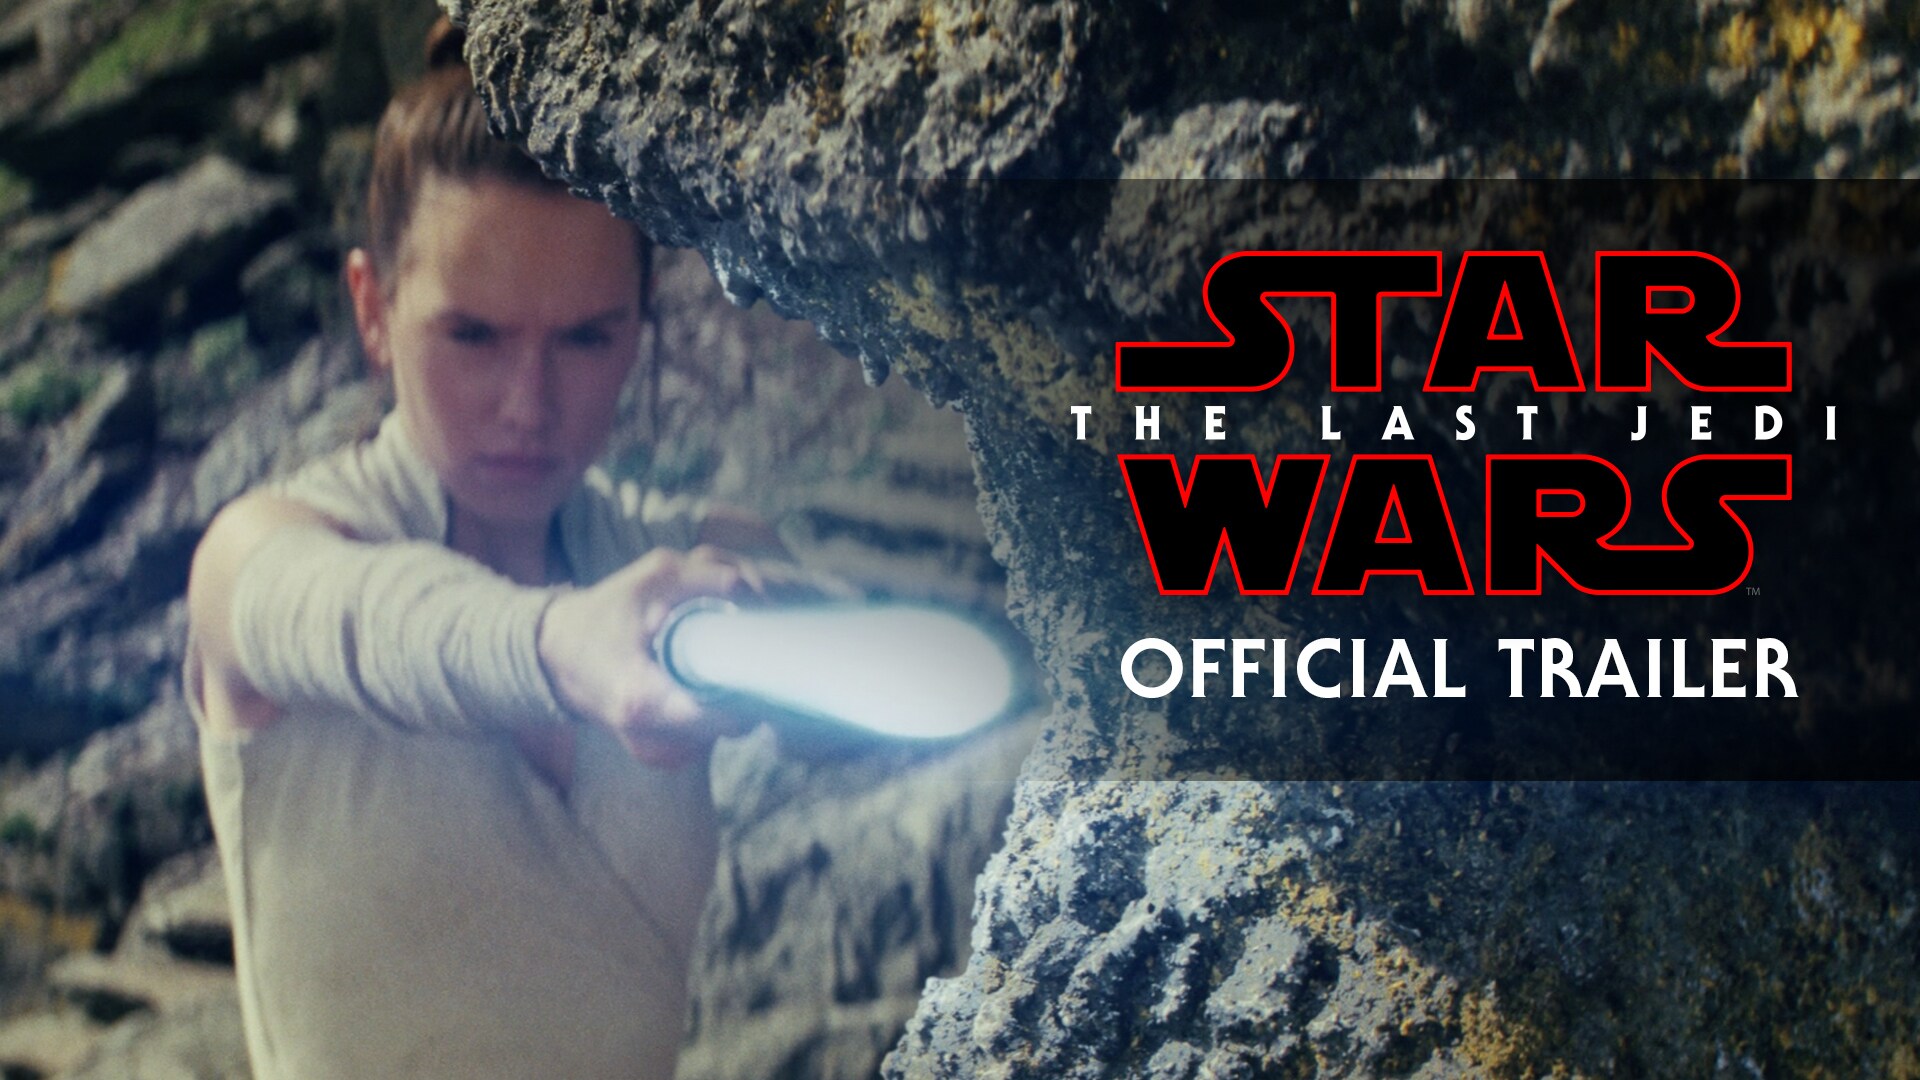 Official Trailer | Star Wars: The Last Jedi